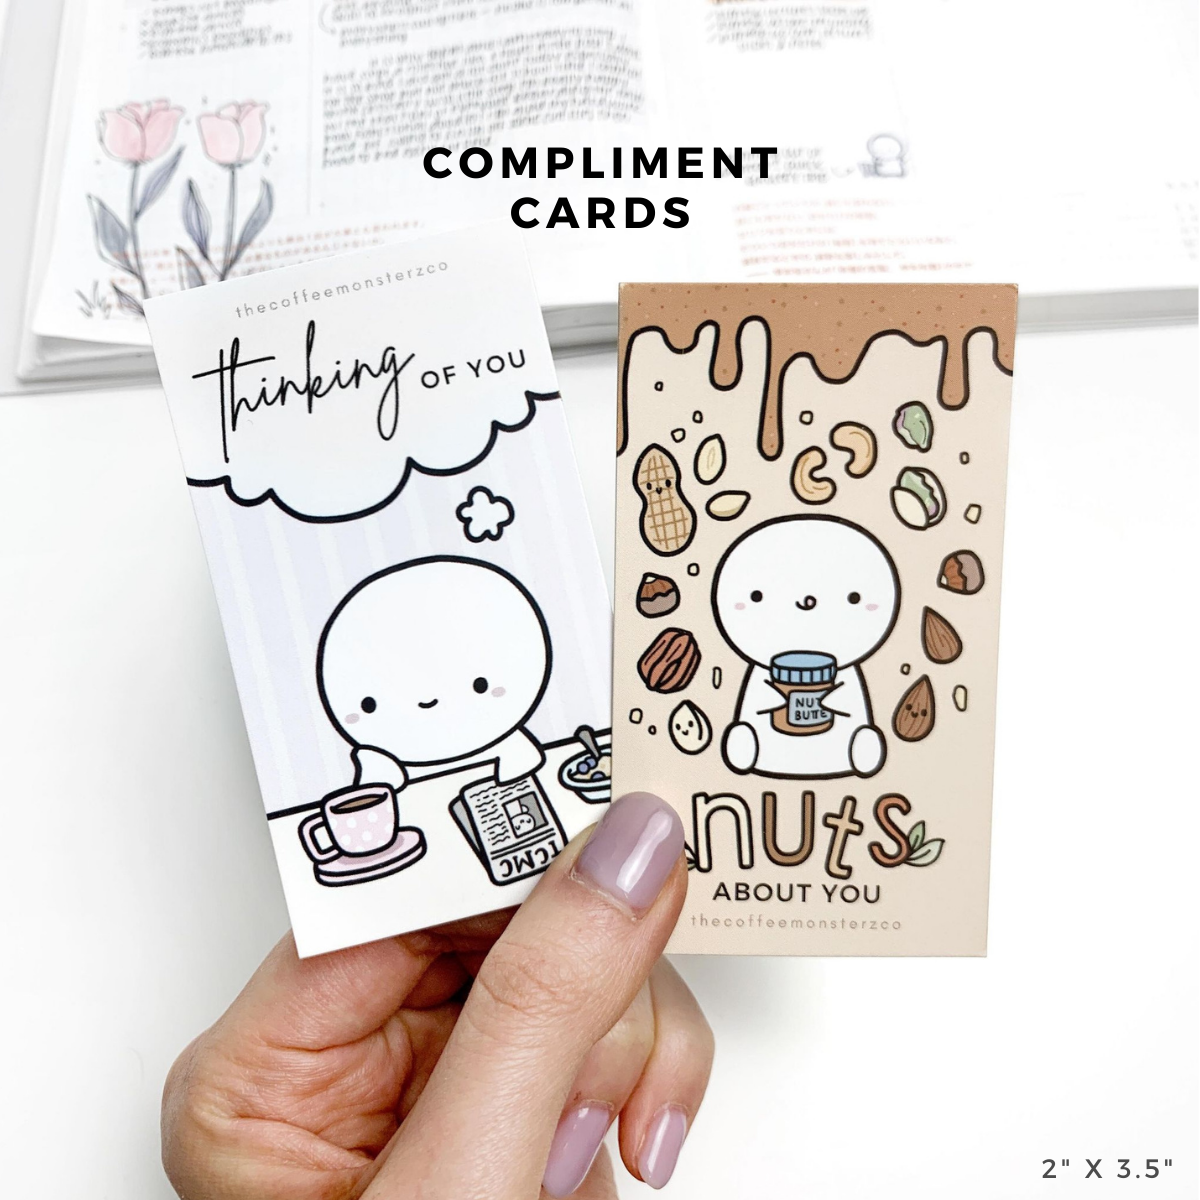 Compliment Cards (1 per customer)